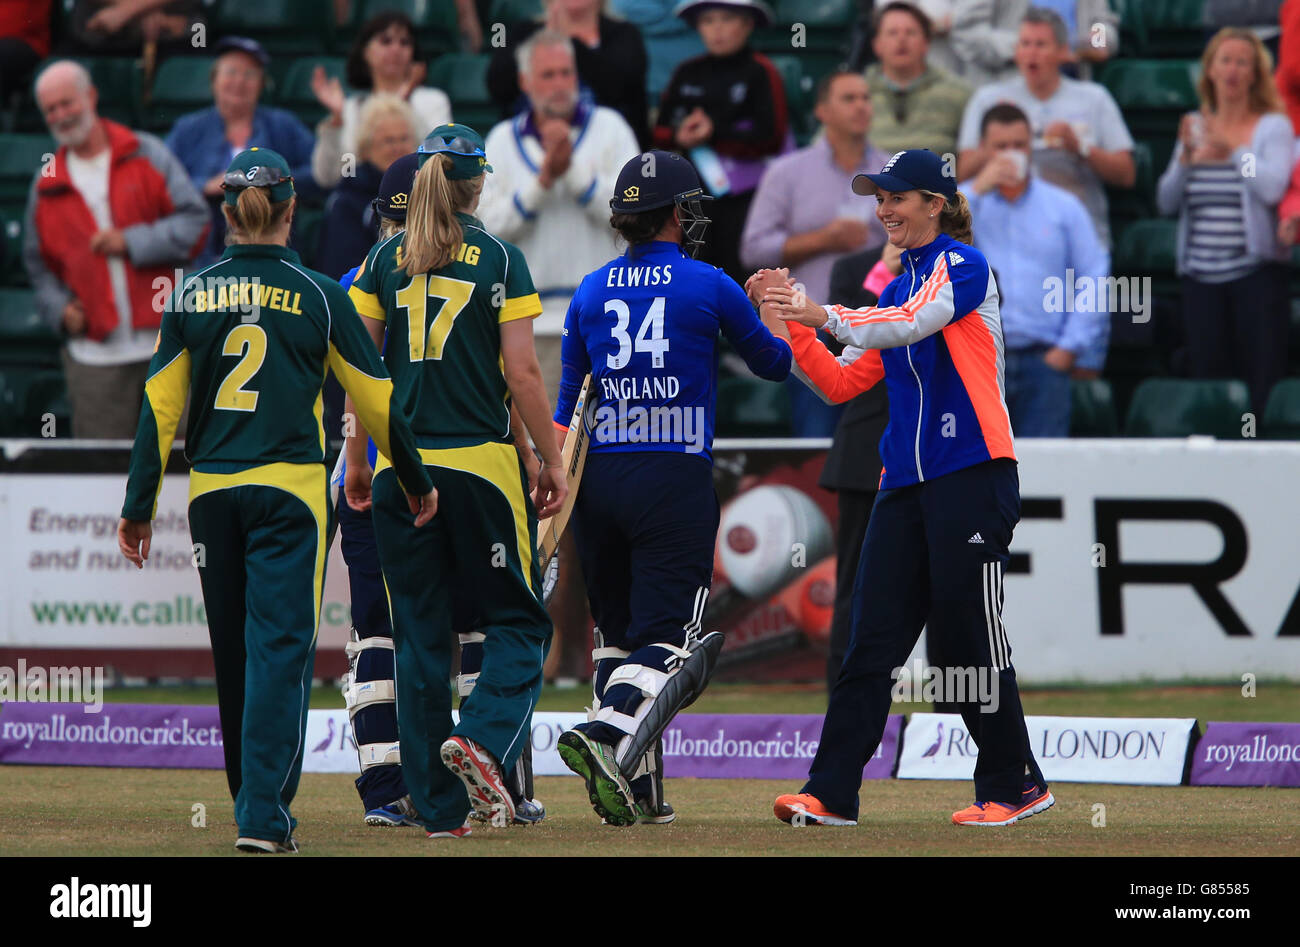 England captain Charlotte Edwards celebrates with batter Georgia Elwiss (centre) after she scored the winning runs to beat Australia by 4 wickets , during the first One Day International of the women's Ashes at The County Ground, Taunton. Picture date: Tuesday July 21, 2015. See PA story CRICKET England Women. Photo credit should read: Nick Potts/PA Wire. RESTRICTIONS: No commercial use without prior written consent of the ECB. Still image use only no moving images to emulate broadcast. No removing or obscuring of sponsor logos. Call +44 (0)1158 447447 for further information Editorial Stock Photo